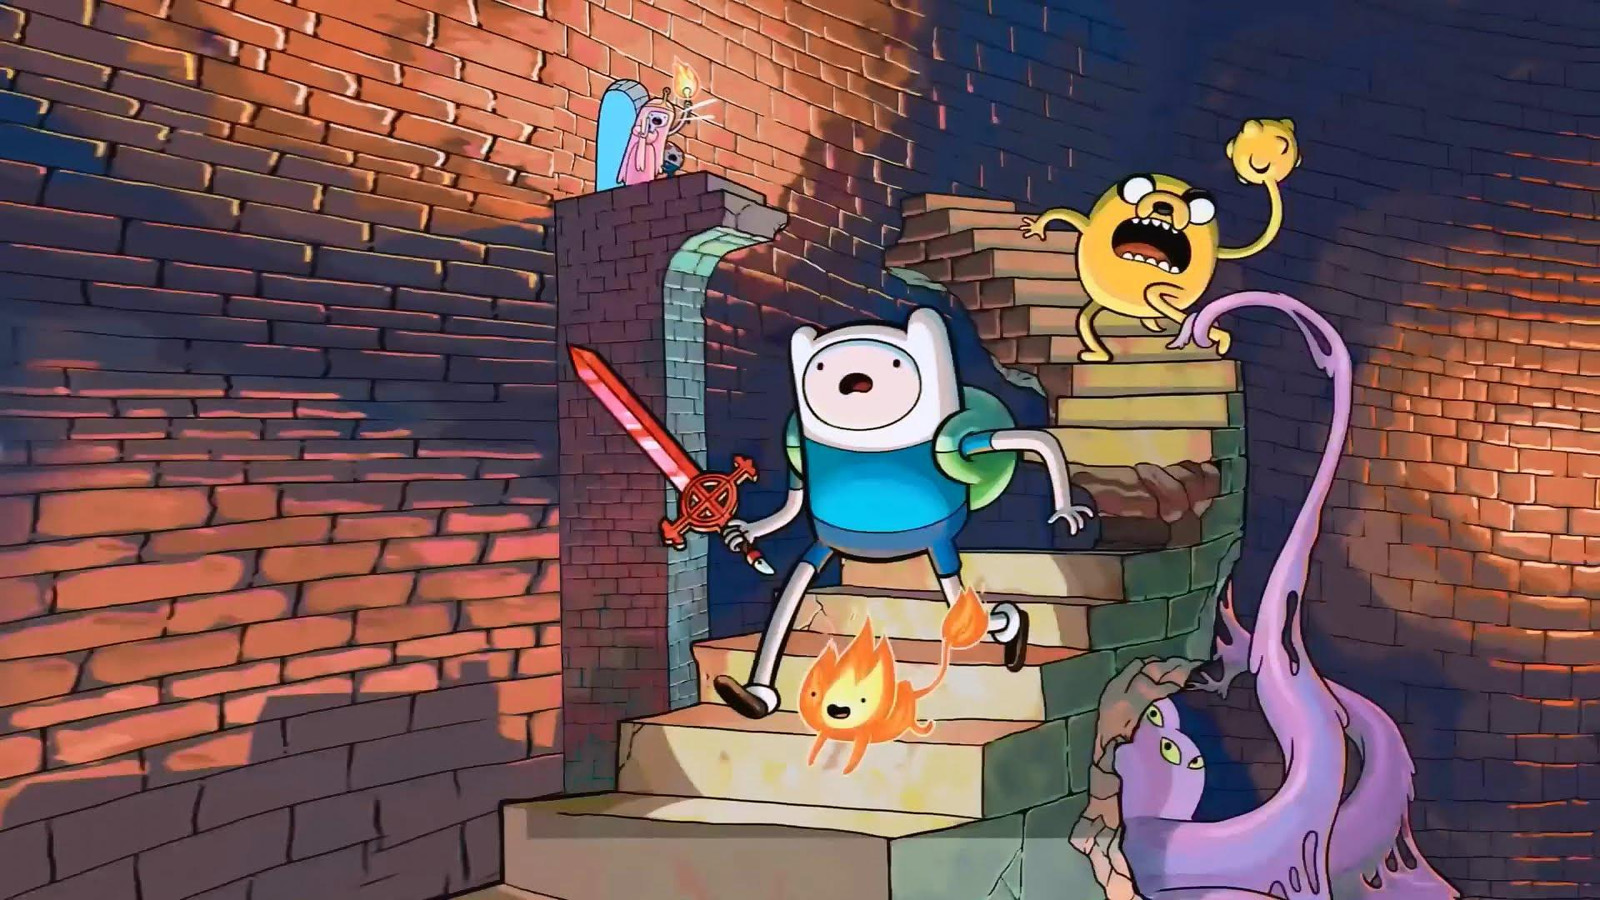 Adventure Time: Explore The Dungeon Because I Dont Know!